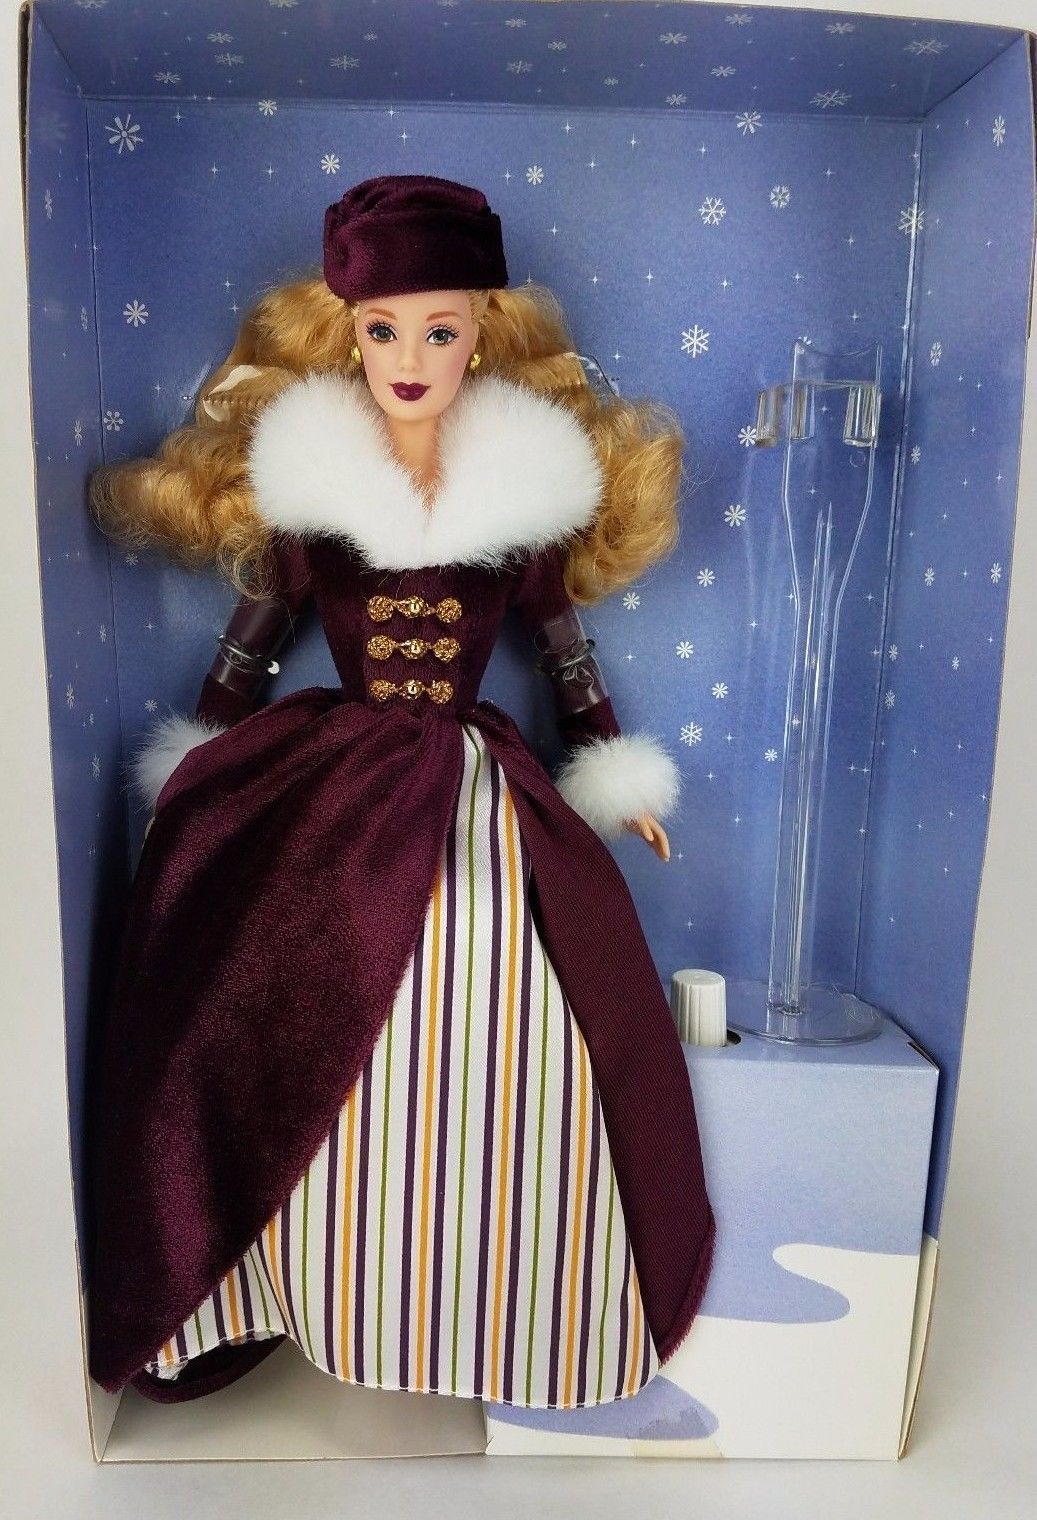 Mattel Victorian Ice Skater Special Edition 2000 Barbie Doll for sale online 